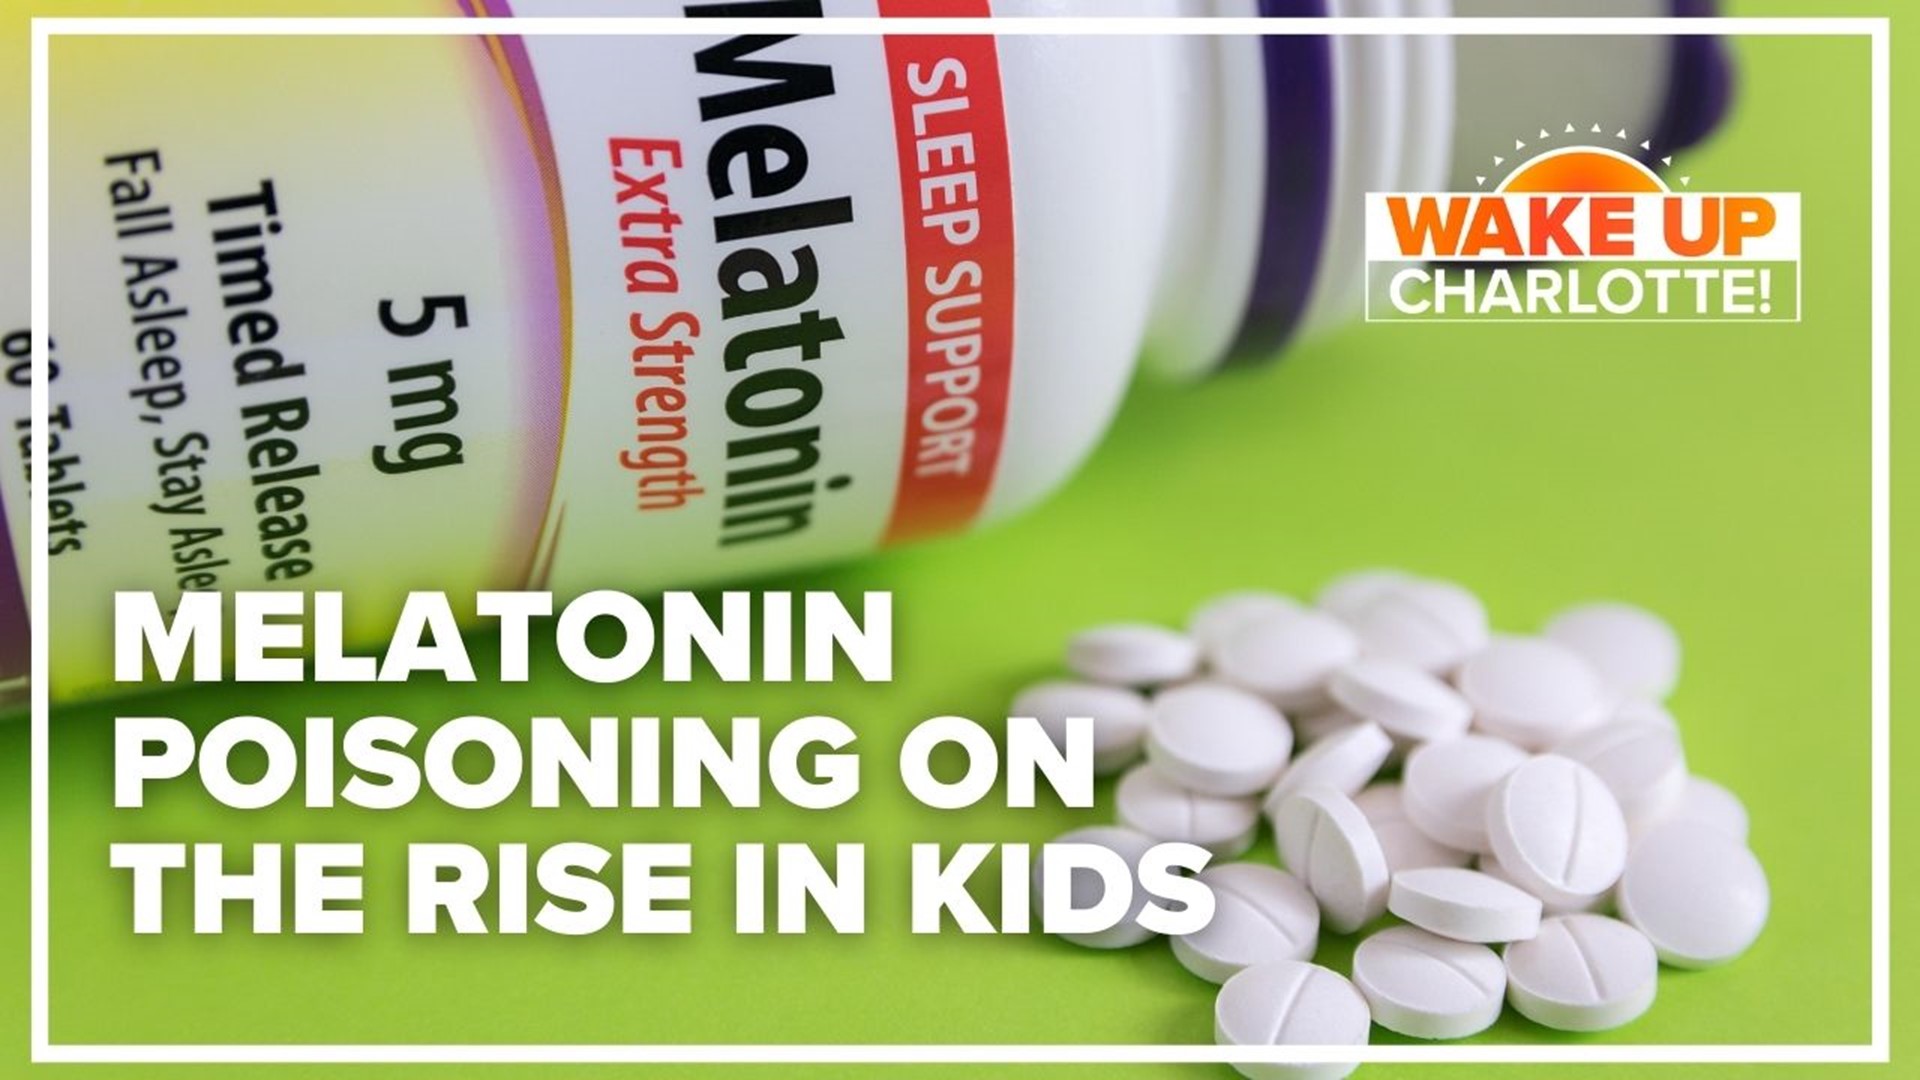 Poisonings in children involving the sleep aid melatonin have increased dramatically in the past year, experts say.